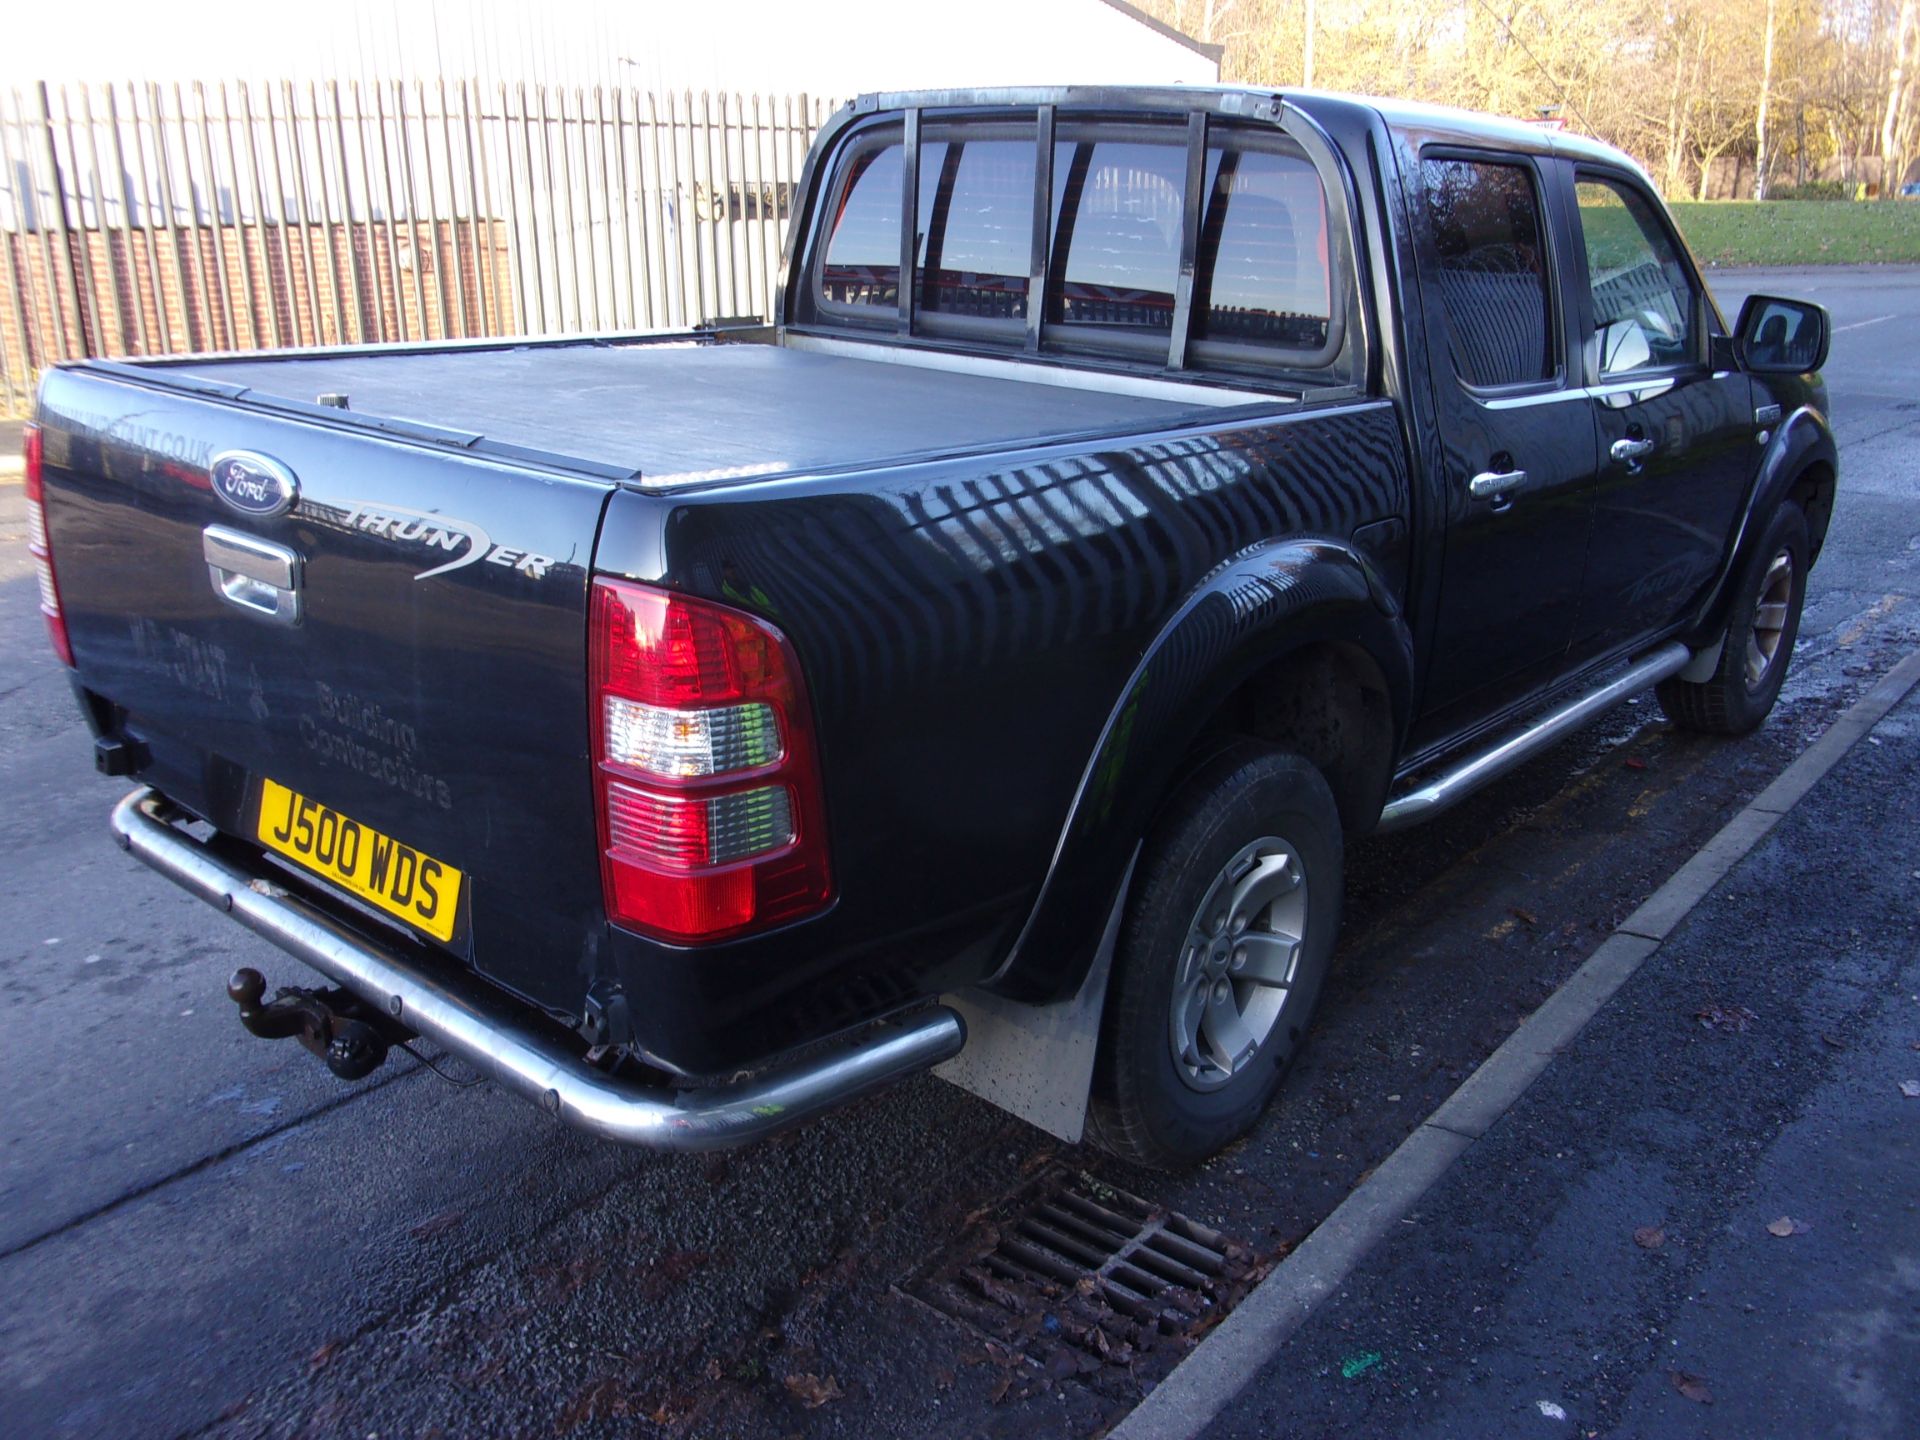 LOT WITHDRAWN | 2008 Ford Ranger Thunder 4x4 - Image 6 of 10